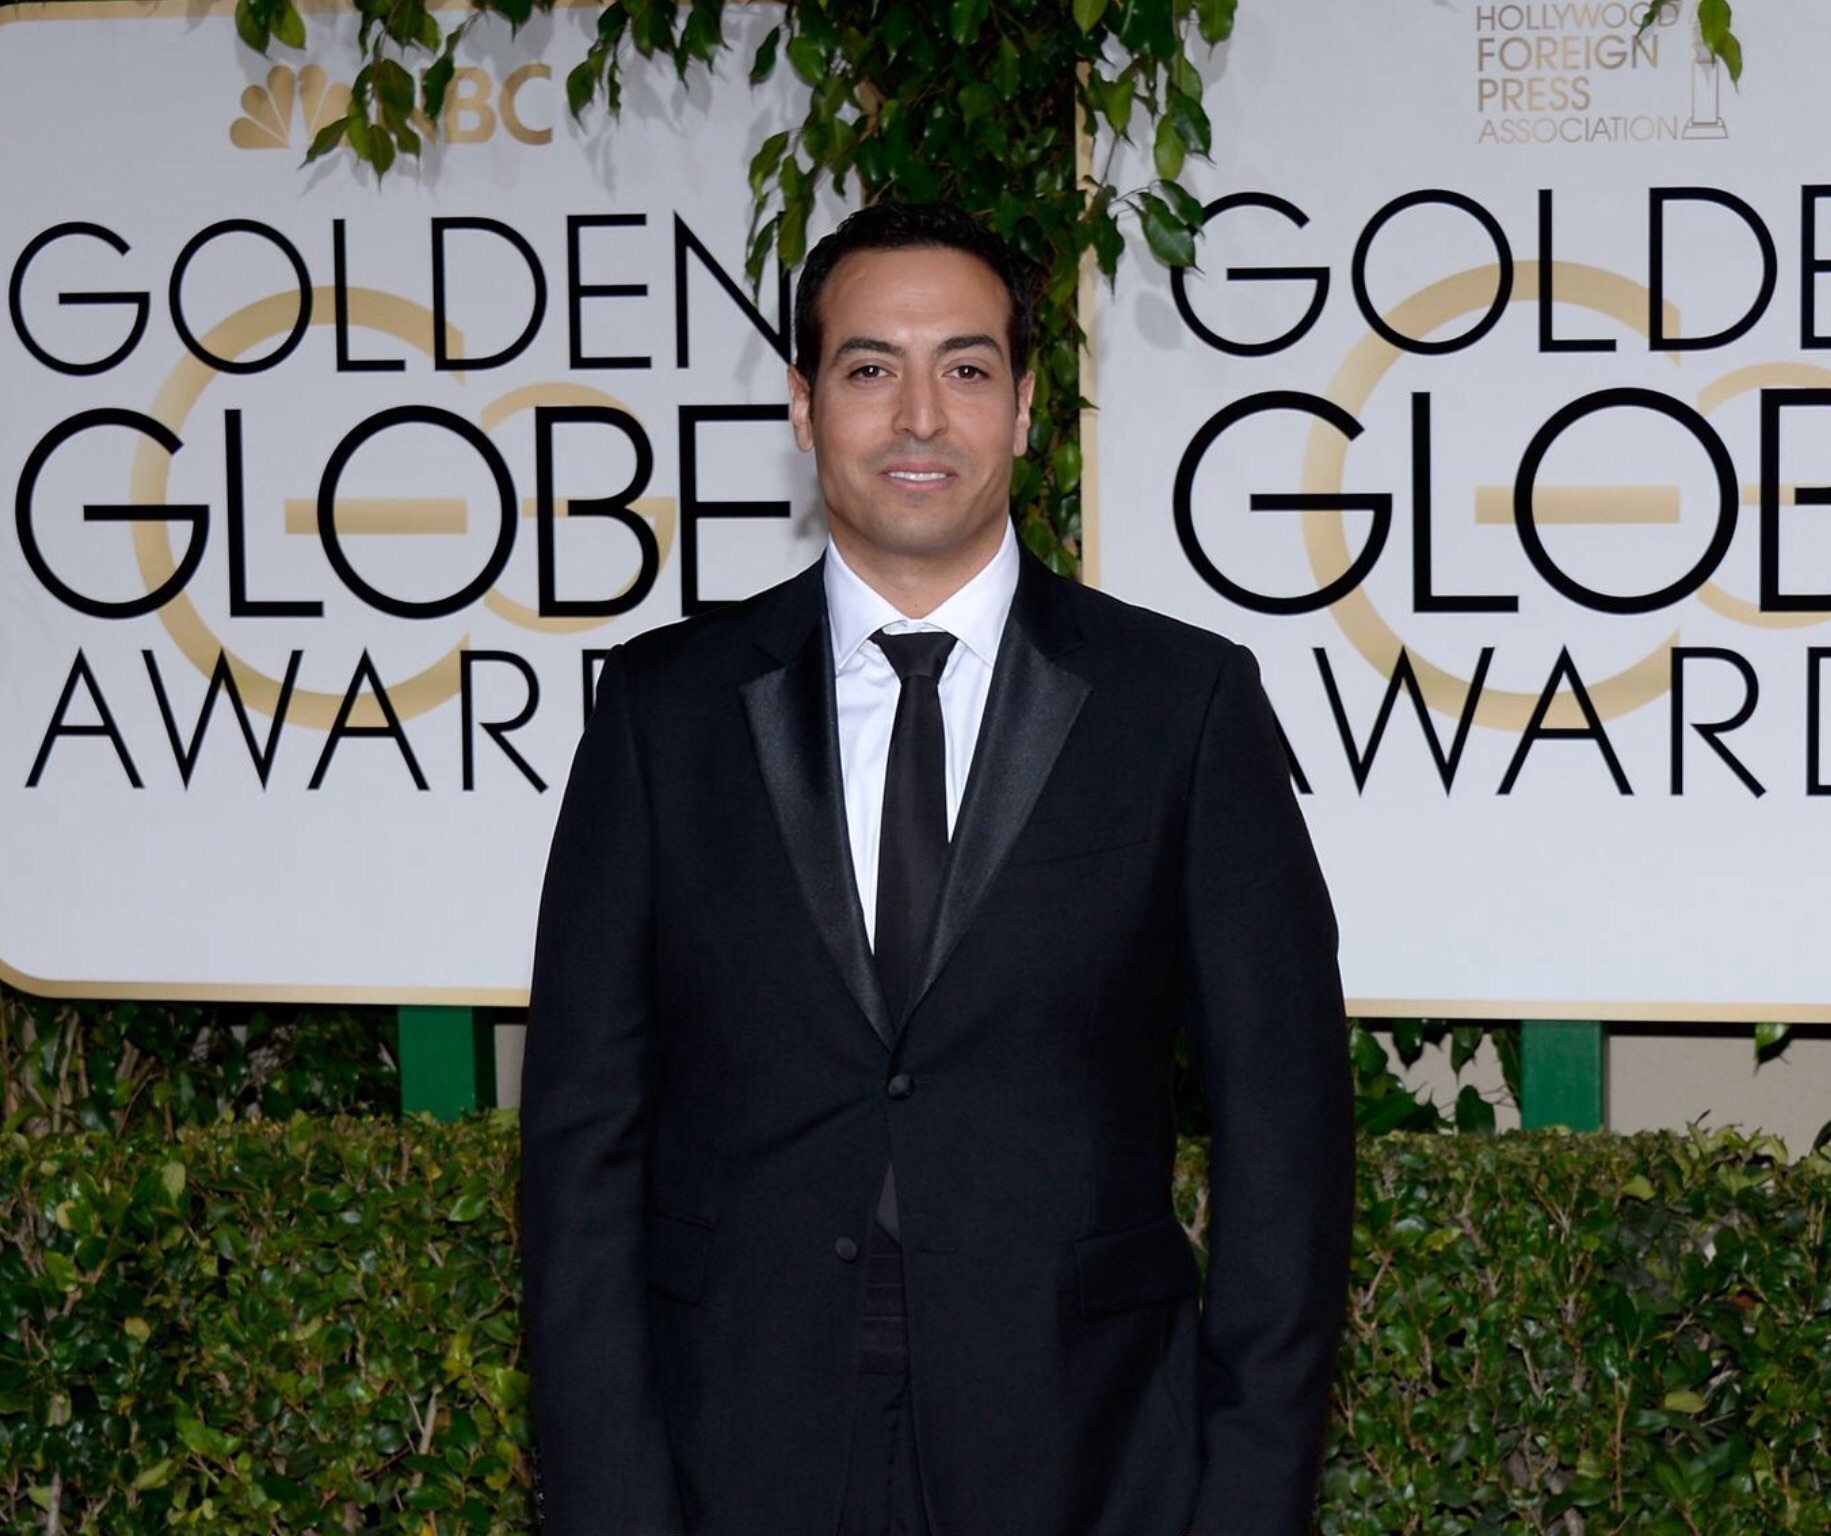 Producer Mohammed Al Turki attends the 71st Annual Golden Globe Awards held at The Beverly Hilton Hotel on January 12, 2014 in Beverly Hills, California.